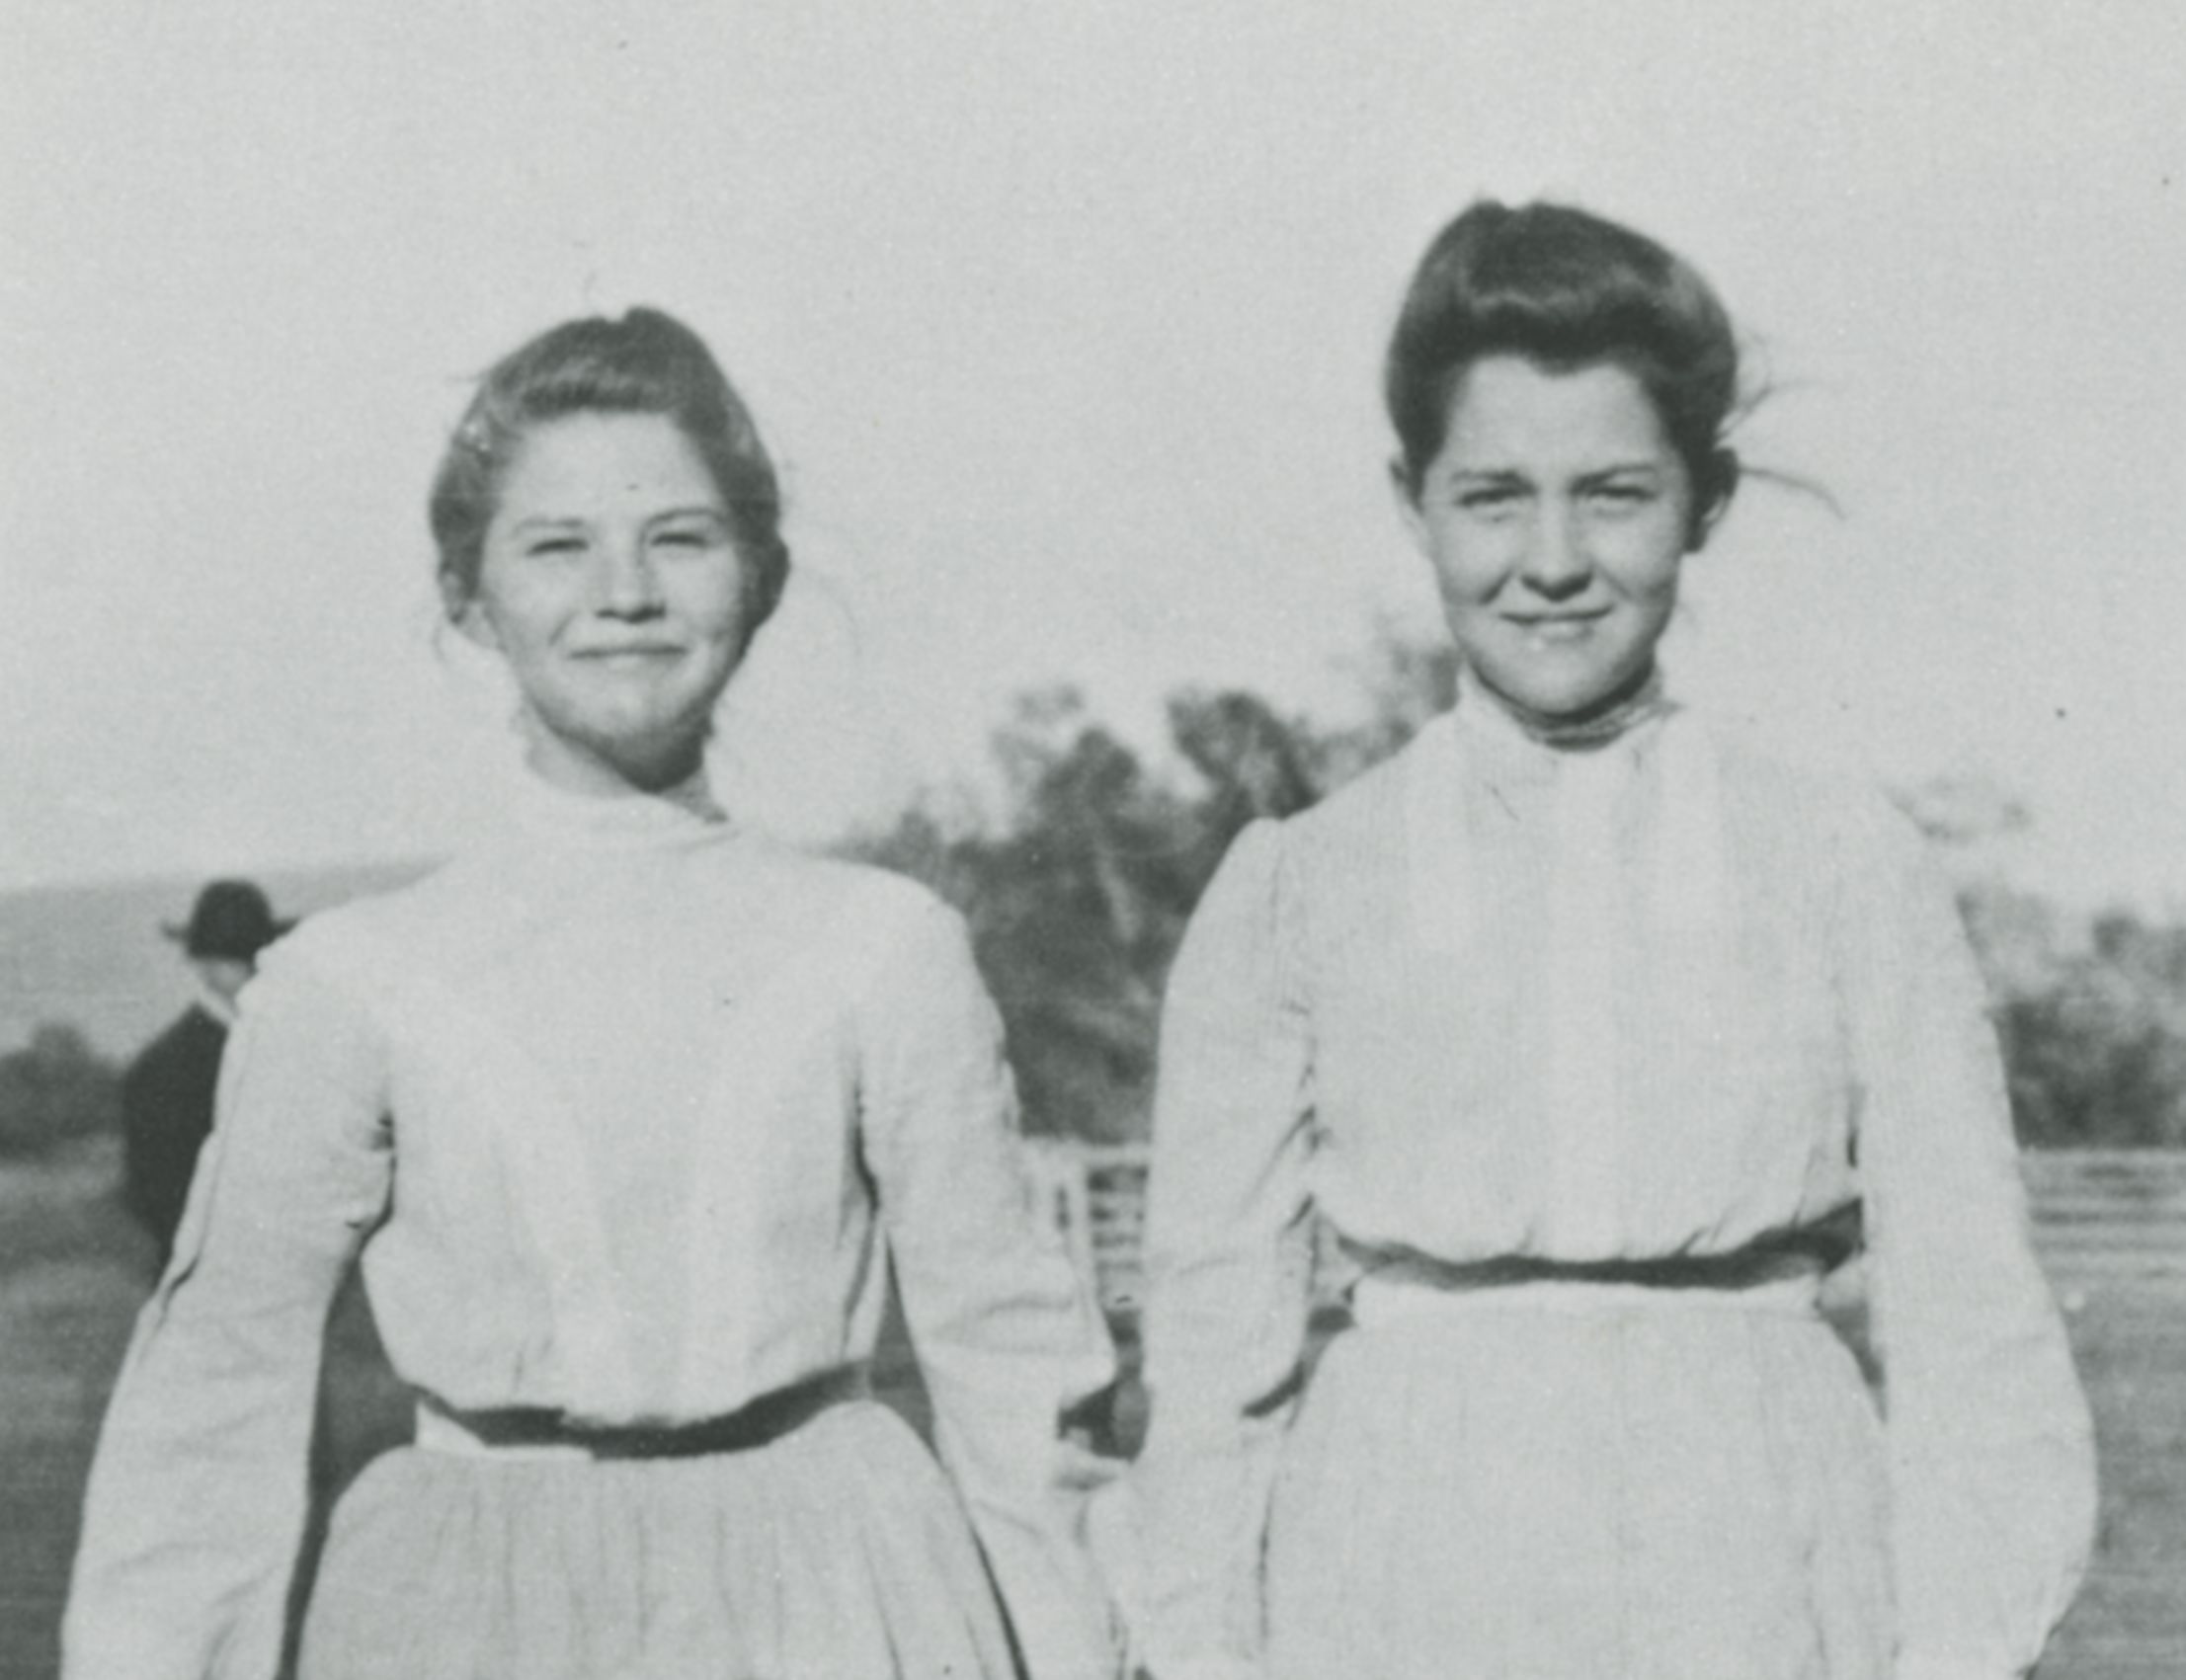 Photo of two young women standing side by side, outdoors. They are both wearing light colored, high neckline, long sleeved blouses with skirts, and they both wear their hair pulled up into buns on their heads. They are smiling at the camera.